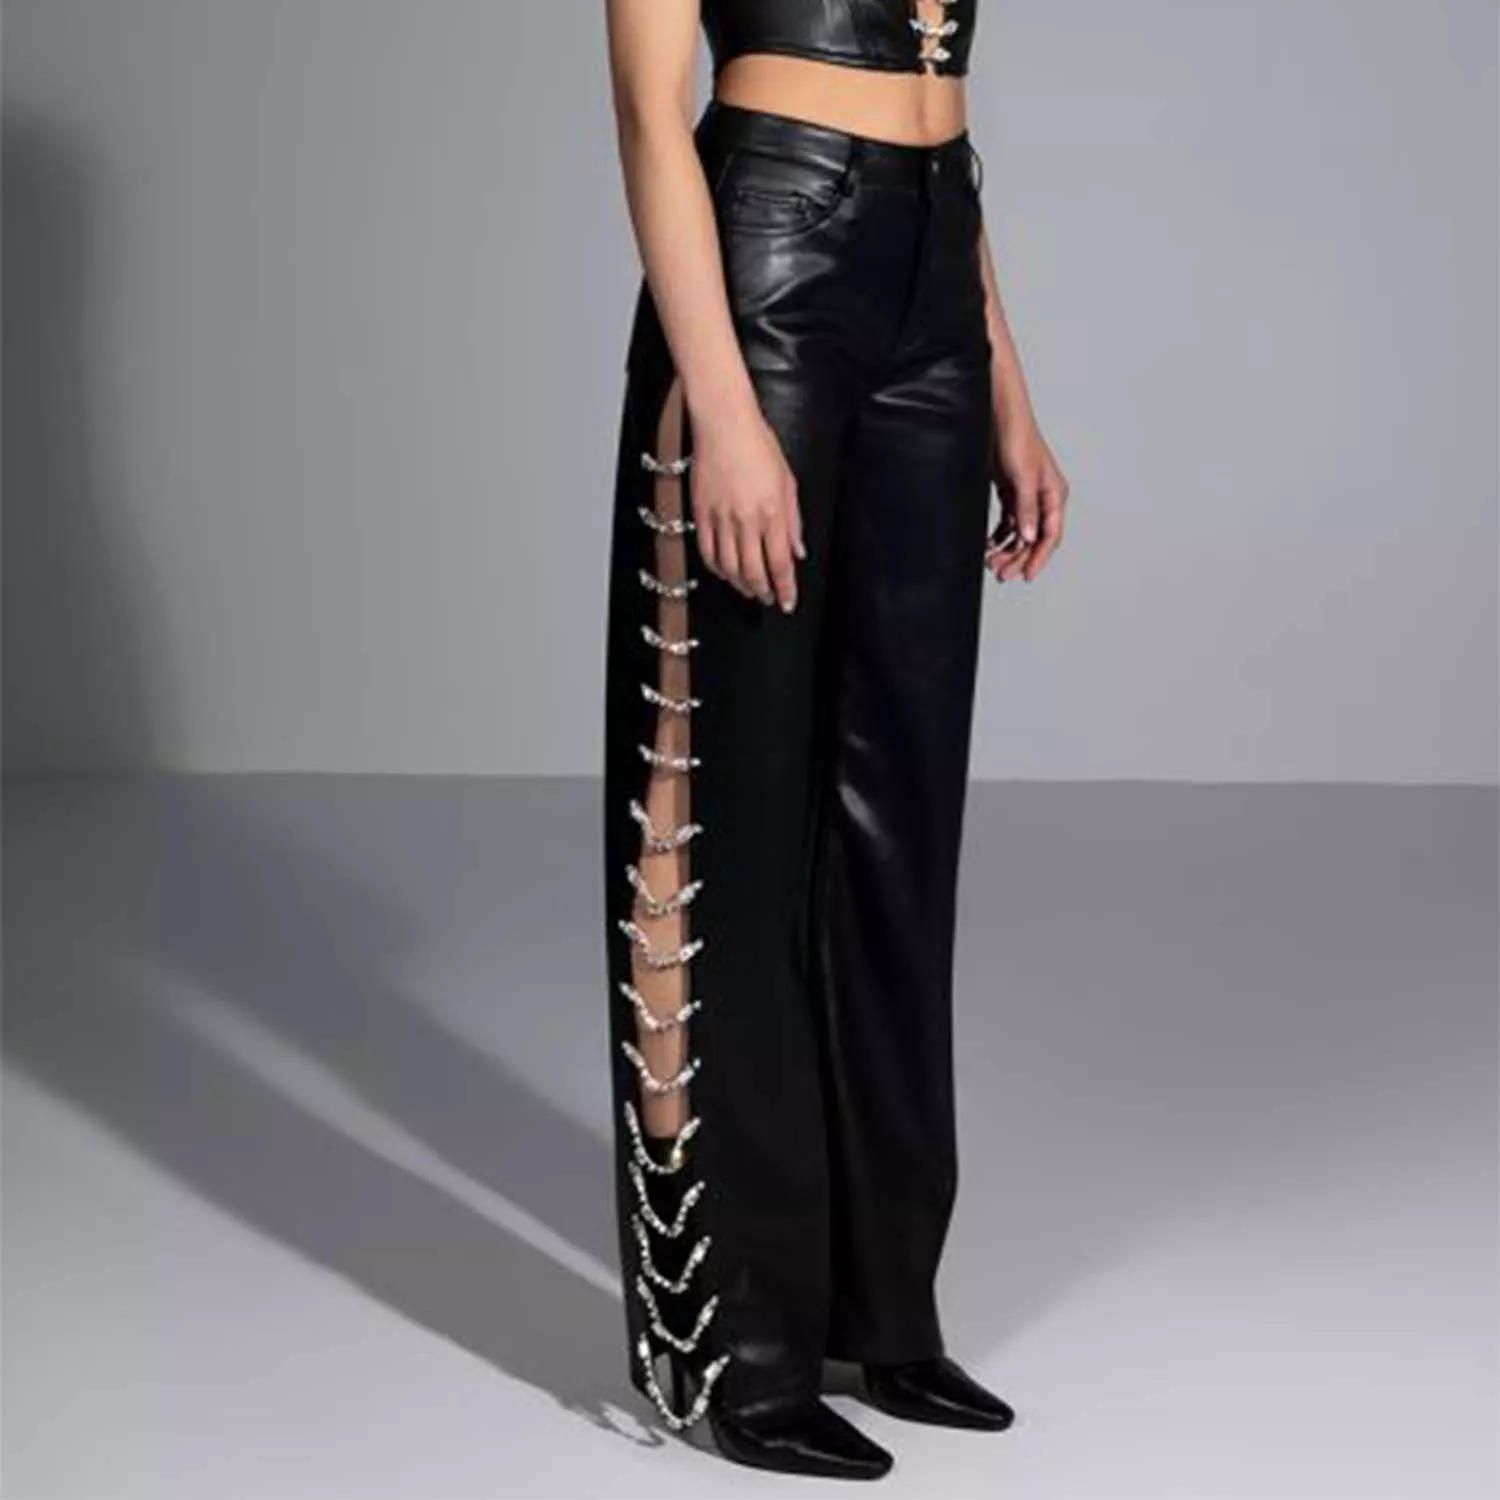 Covered in Ice Faux Leather Rhinestone Pant